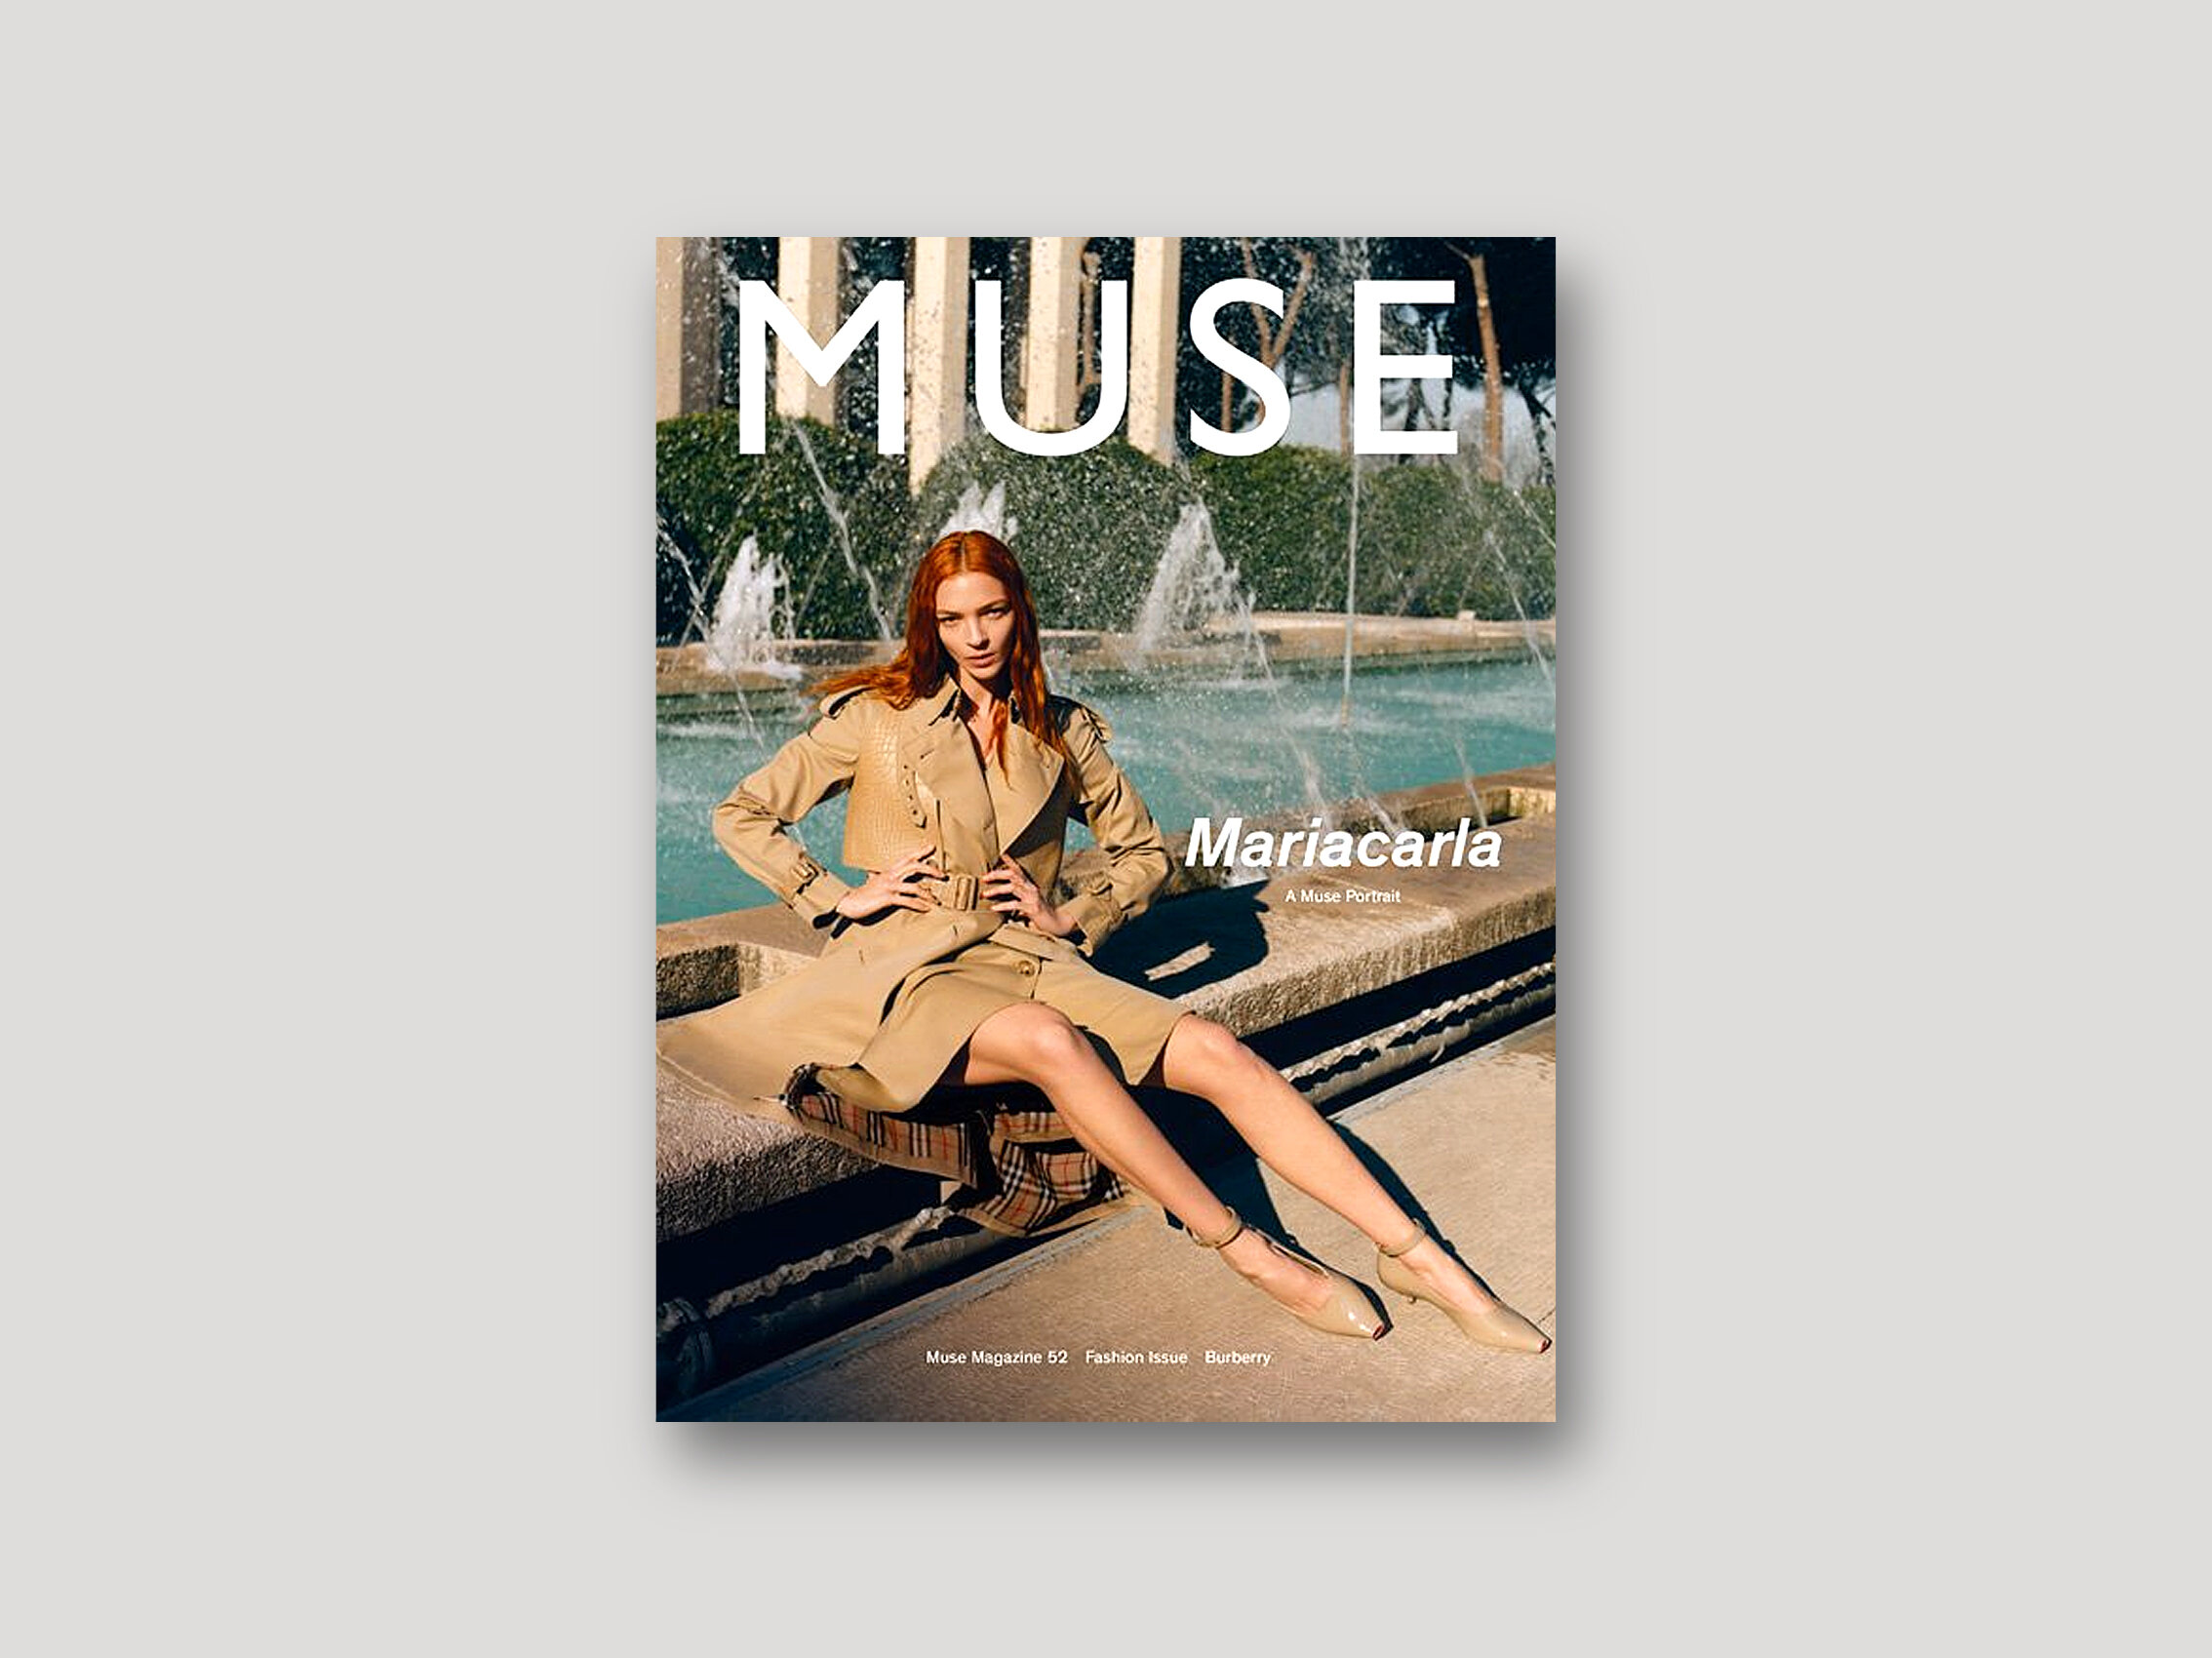   2019 Muse Magazine  (IT) Issue 52, ‘ Modern Workers’  